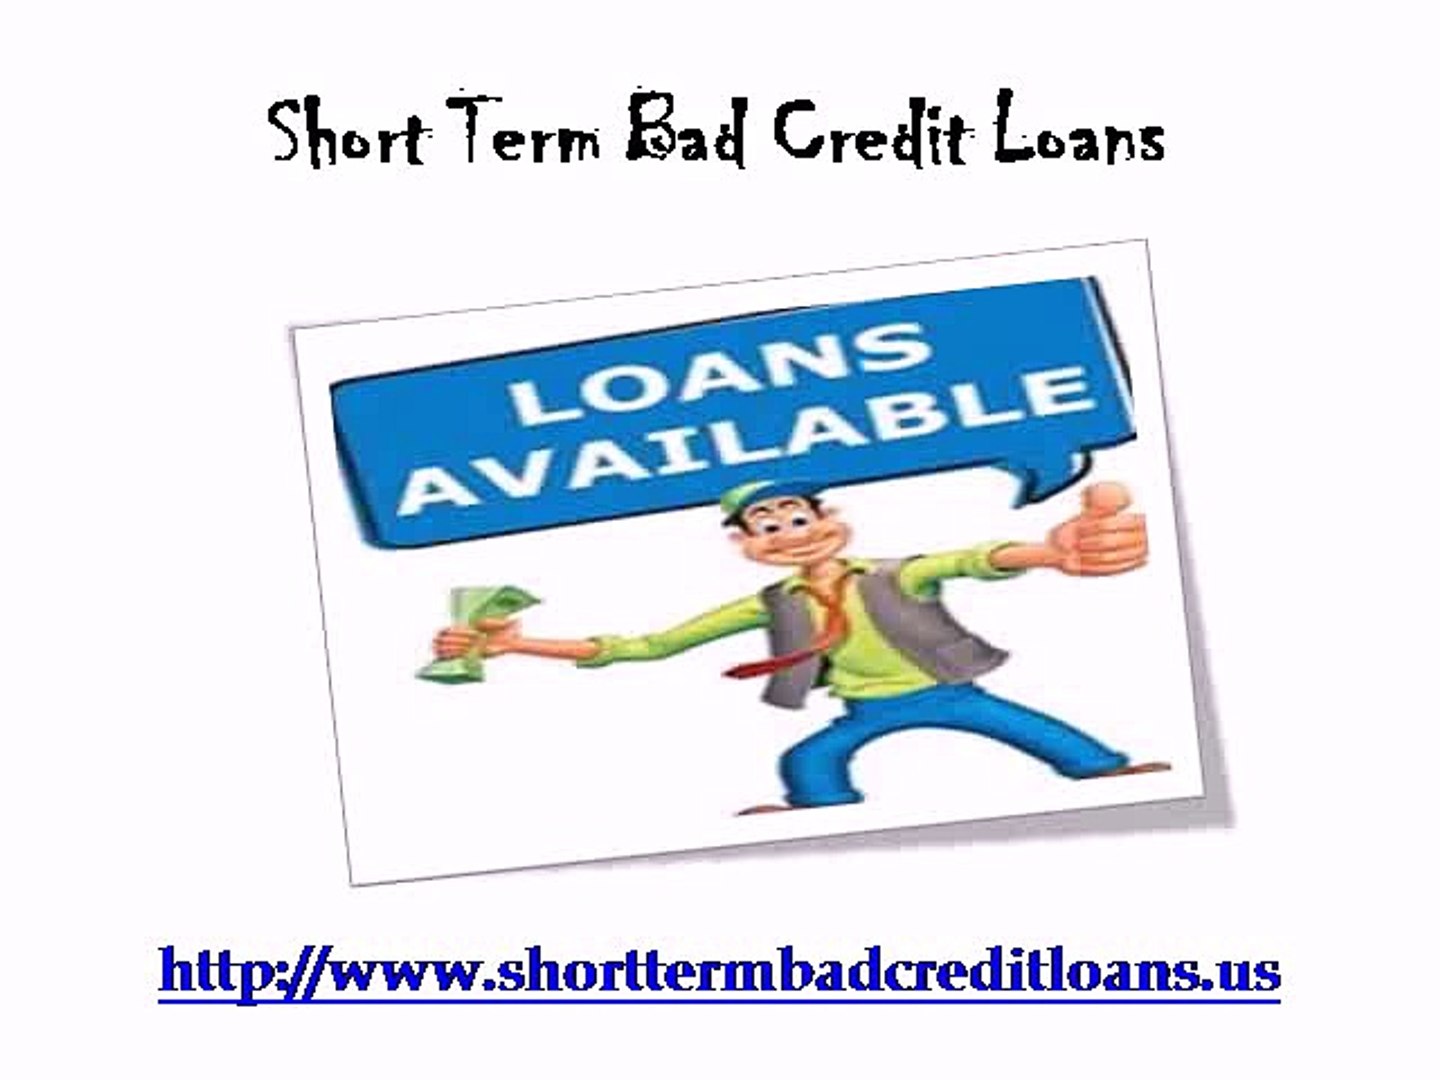 Easy and Fast Short Term Loans Solution for Many Borrowers